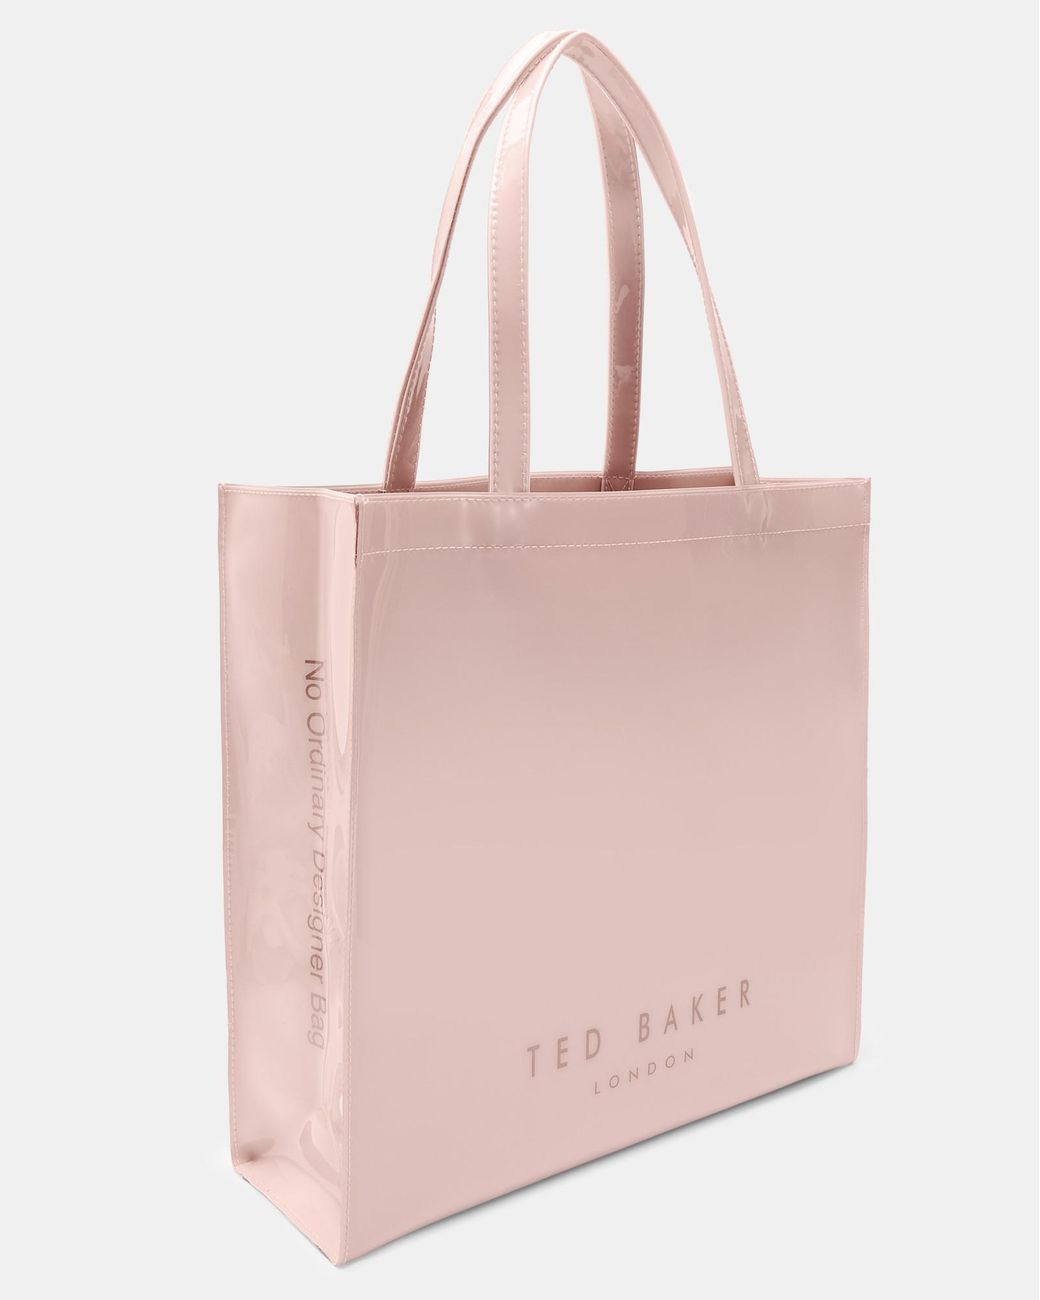 Ted Baker Soft Large Icon Bag in Pink - Lyst